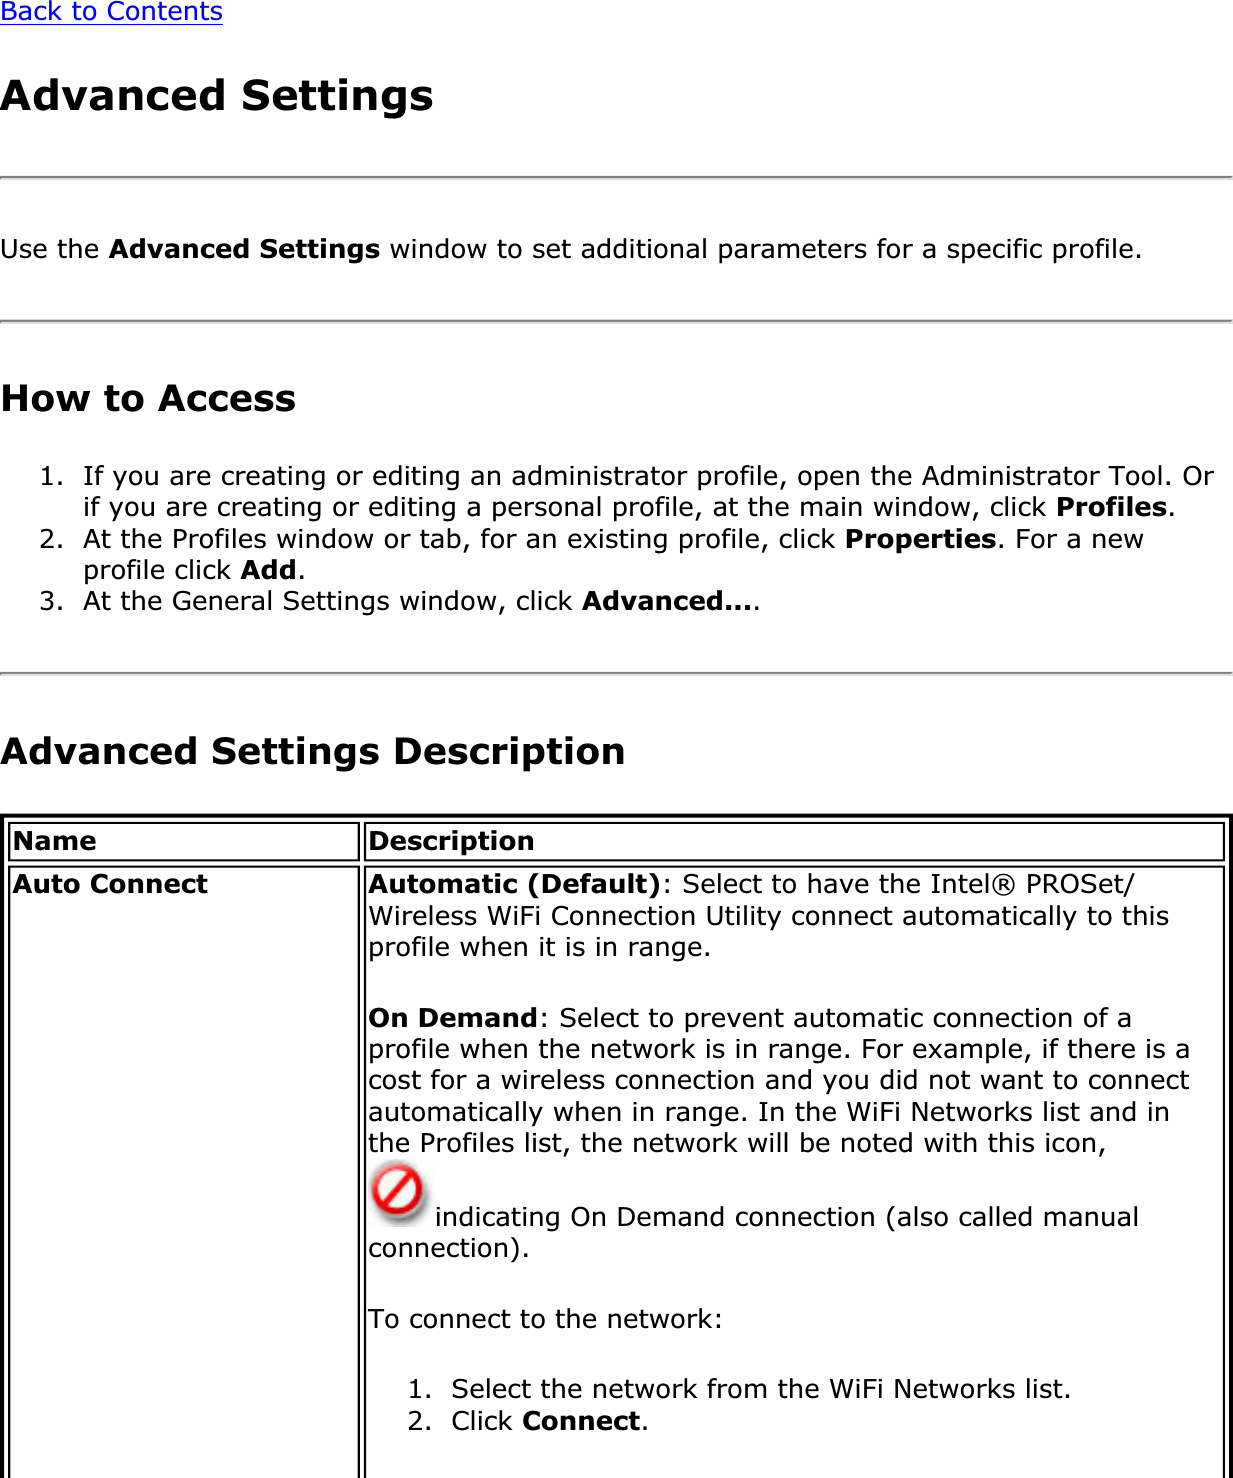 Back to ContentsAdvanced SettingsUse the Advanced Settings window to set additional parameters for a specific profile. How to Access 1. If you are creating or editing an administrator profile, open the Administrator Tool. Or if you are creating or editing a personal profile, at the main window, click Profiles.2. At the Profiles window or tab, for an existing profile, click Properties. For a new profile click Add.3. At the General Settings window, click Advanced....Advanced Settings Description Name DescriptionAuto Connect Automatic (Default): Select to have the Intel® PROSet/Wireless WiFi Connection Utility connect automatically to this profile when it is in range.On Demand: Select to prevent automatic connection of a profile when the network is in range. For example, if there is a cost for a wireless connection and you did not want to connect automatically when in range. In the WiFi Networks list and in the Profiles list, the network will be noted with this icon, indicating On Demand connection (also called manual connection).To connect to the network:1. Select the network from the WiFi Networks list.2. Click Connect.